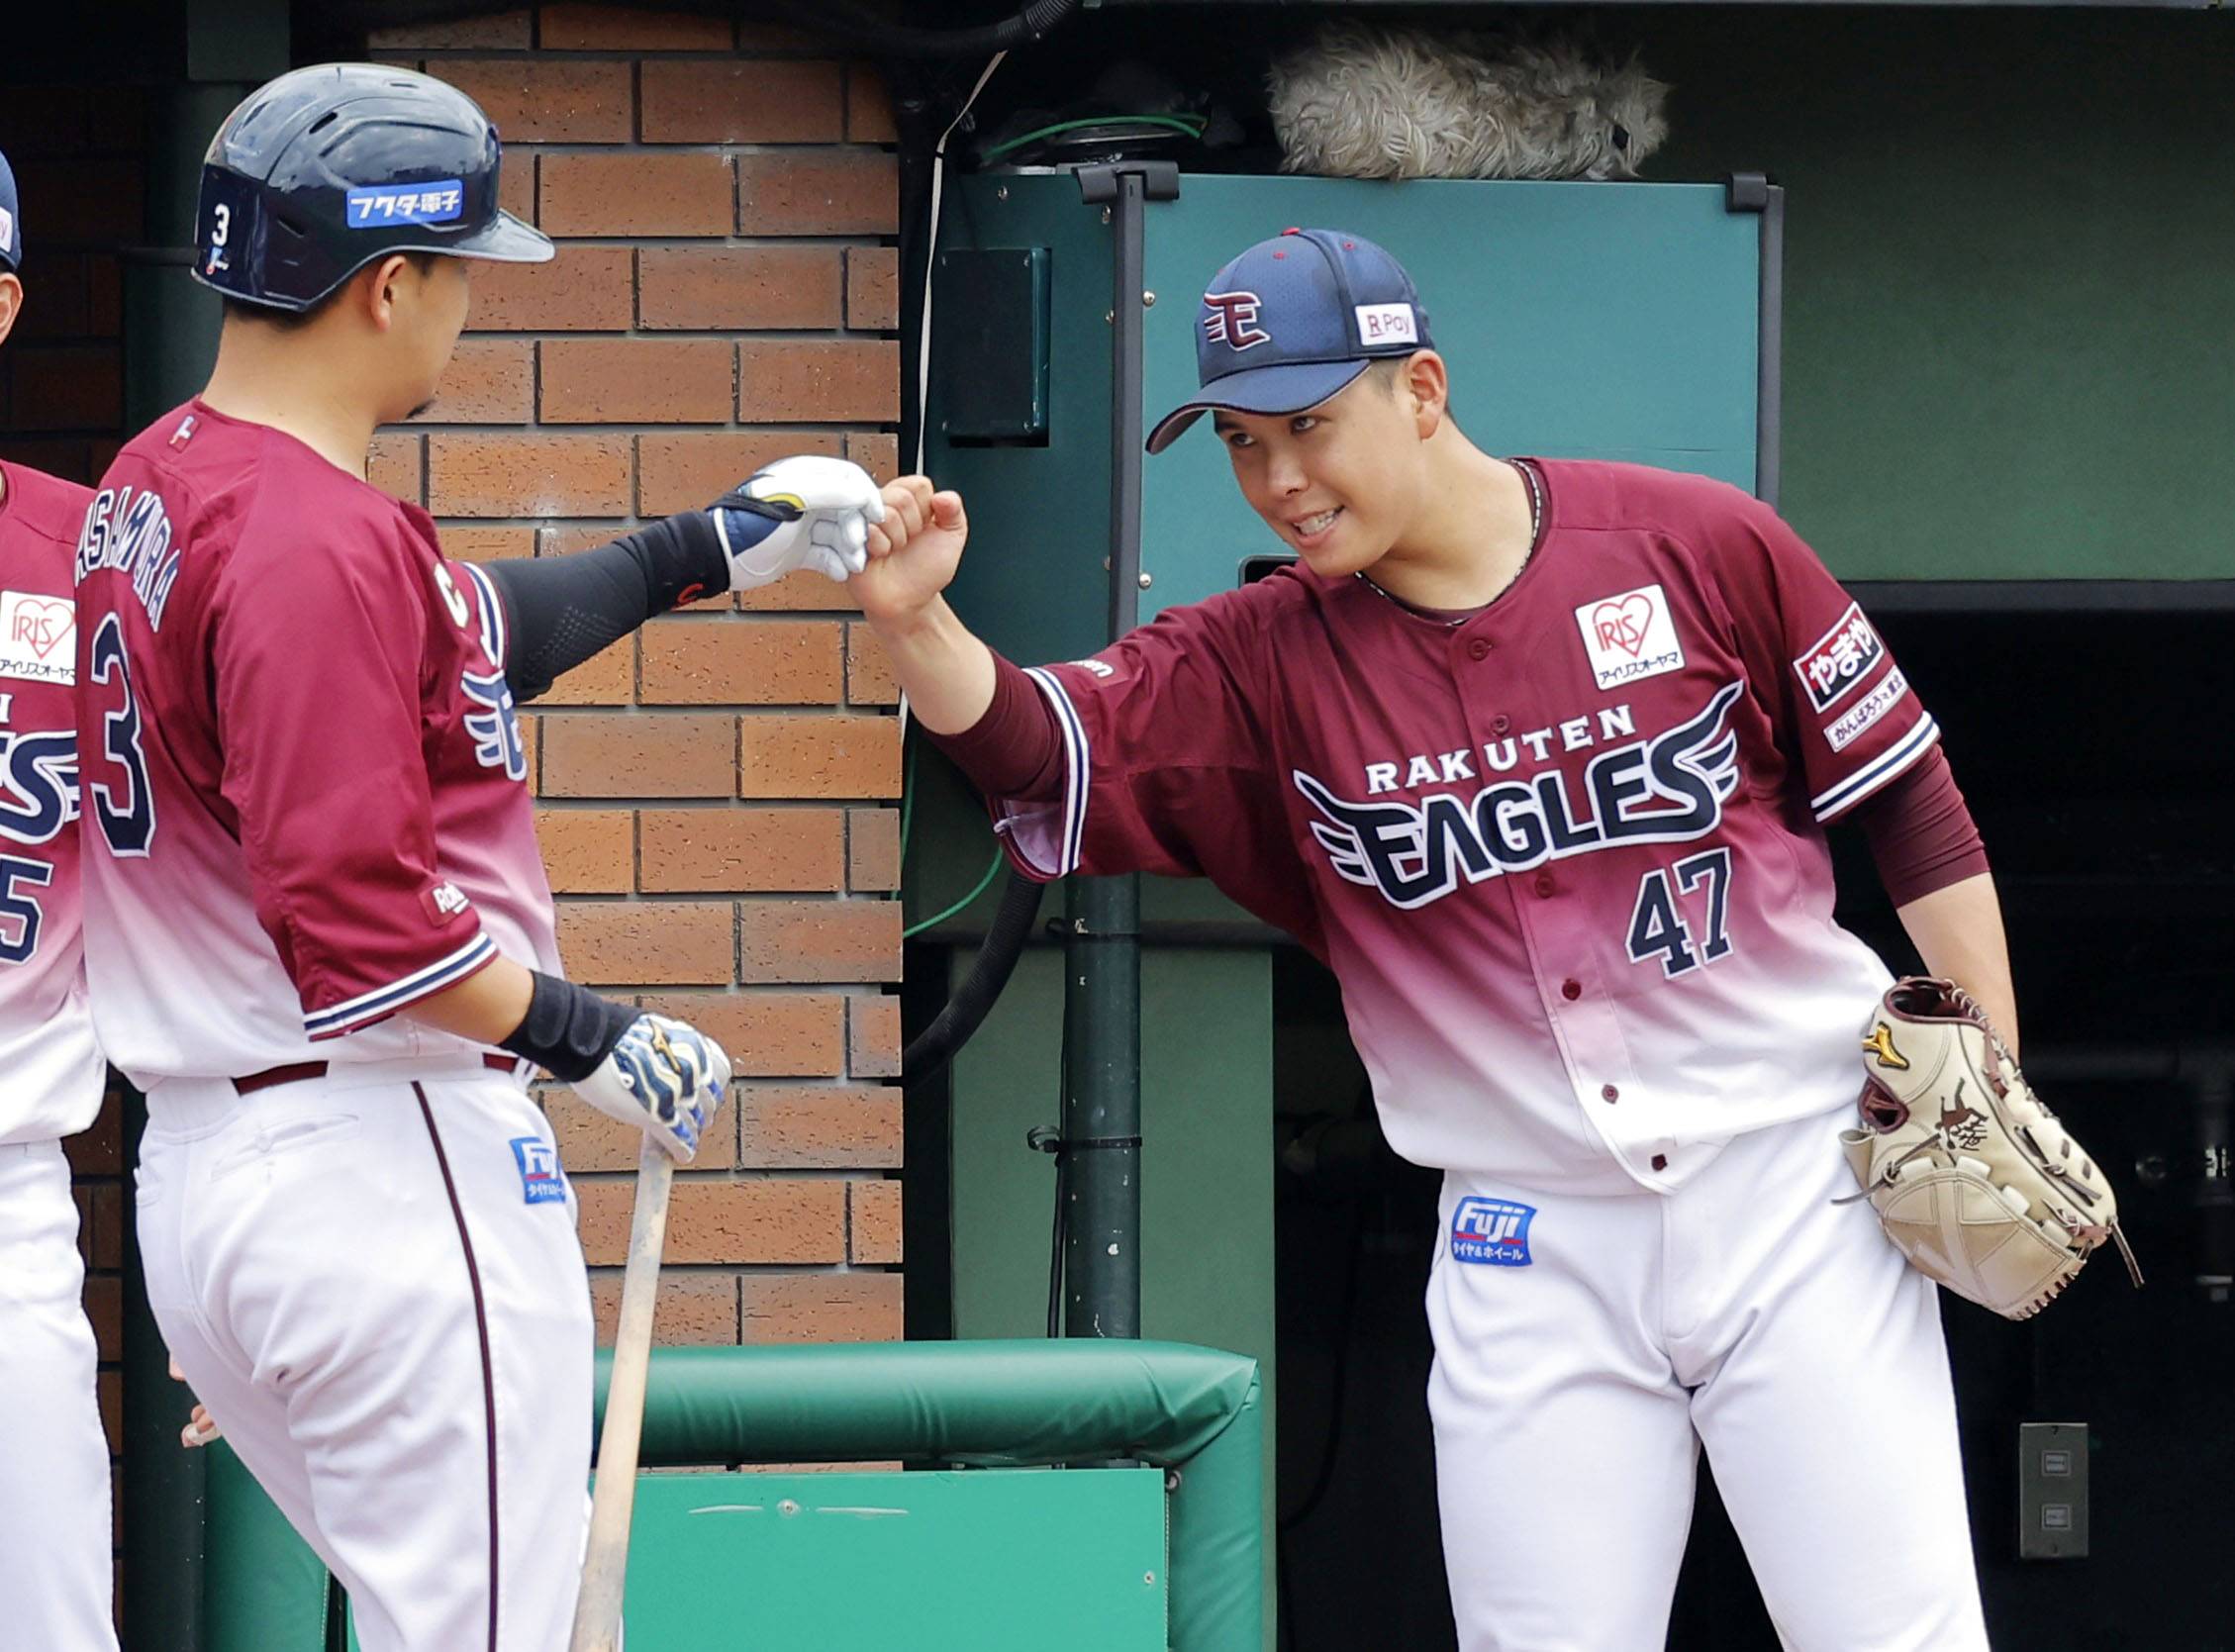 Masaru Fujii And Hideto Asamura Boost Eagles To Fifth Straight Win The Japan Times